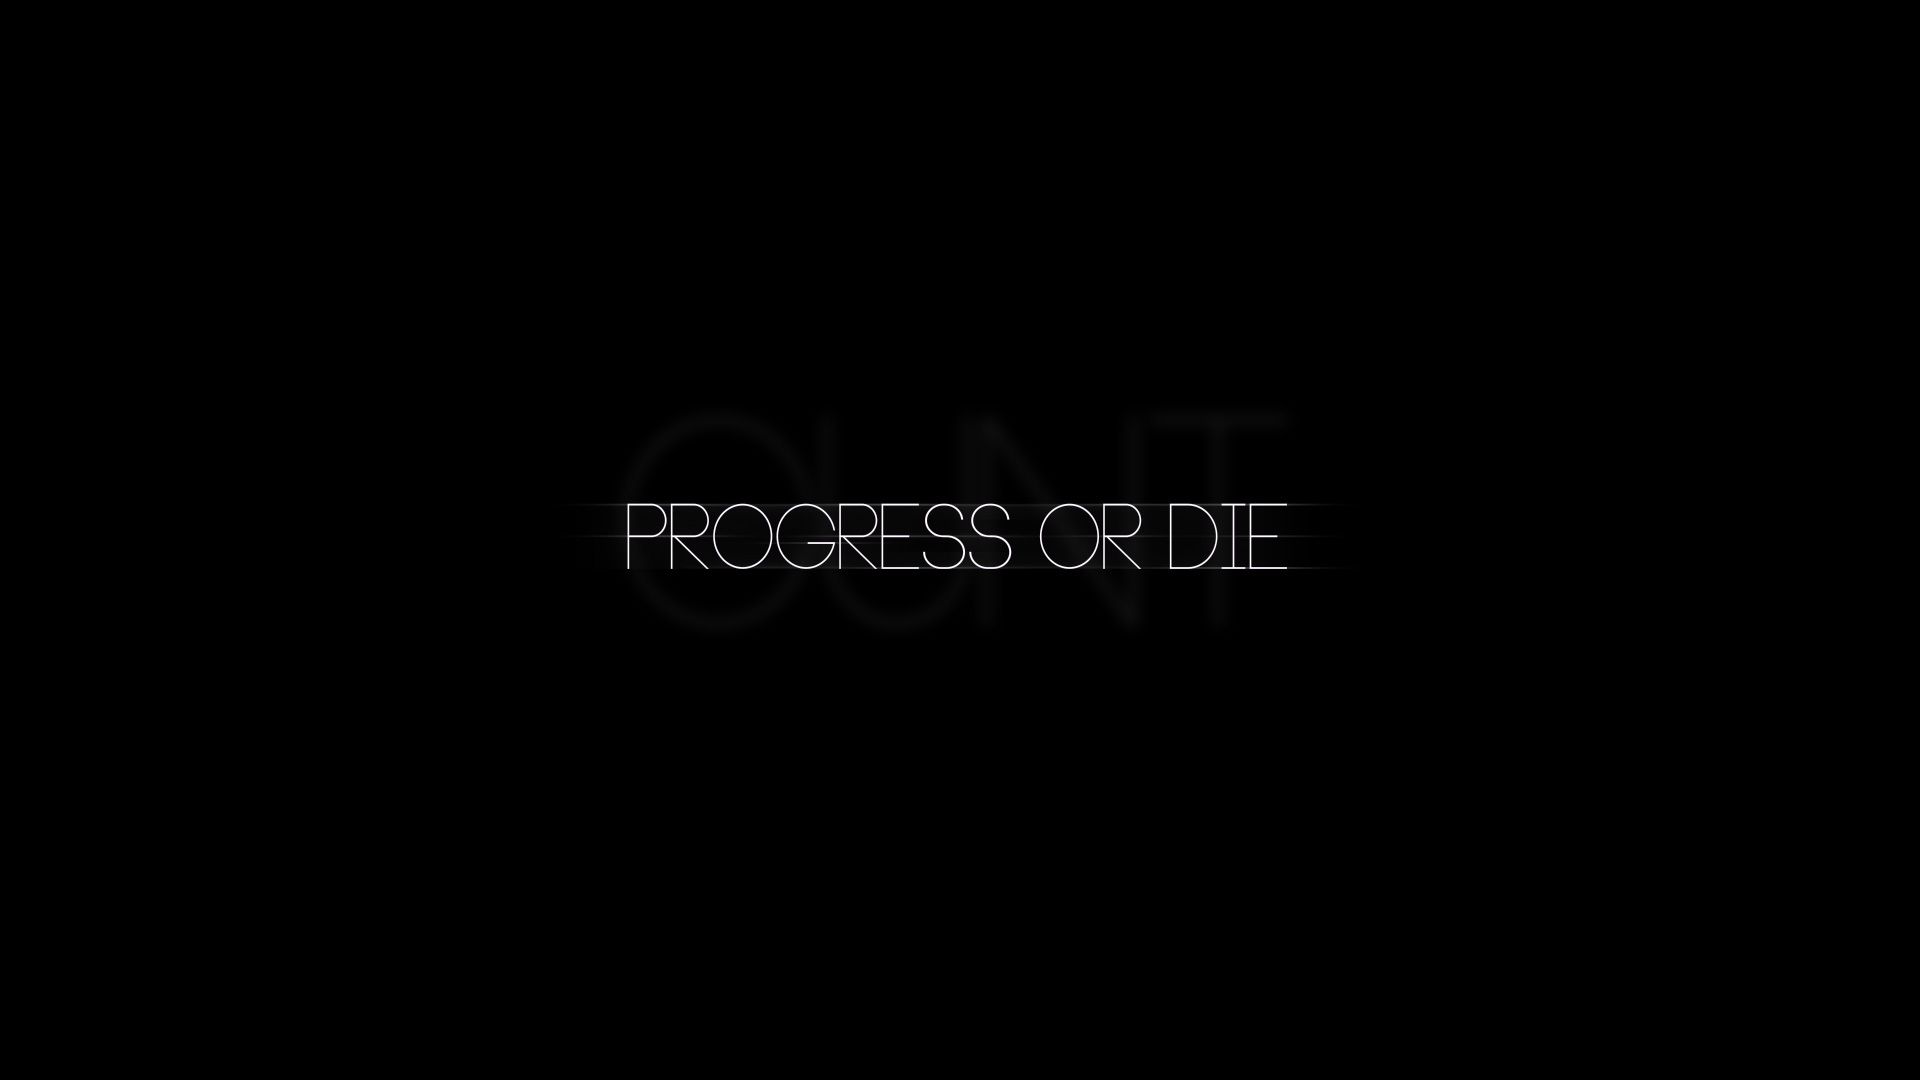 Progress Or Die Typography, HD Typography, 4k Wallpaper, Image, Background, Photo and Picture